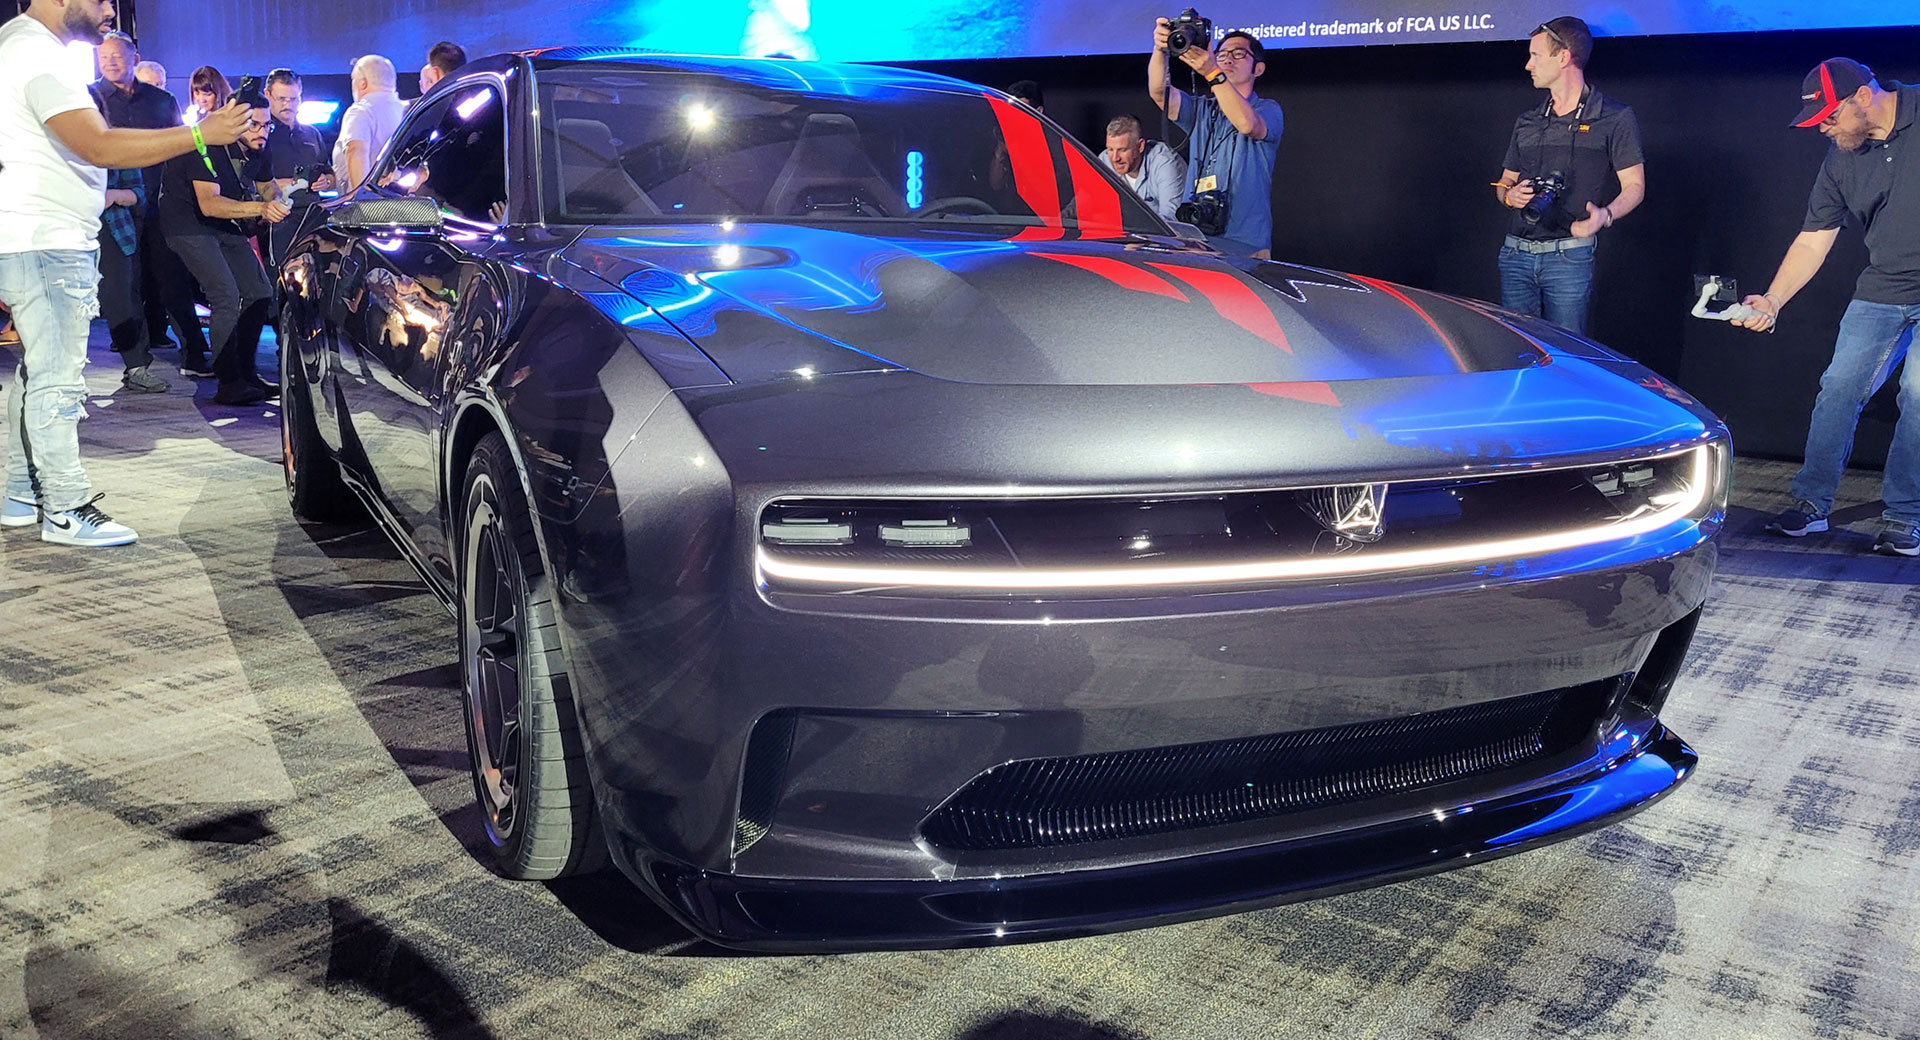 The Dodge Charger Daytona SRT is a Charged Up Electric Prototype